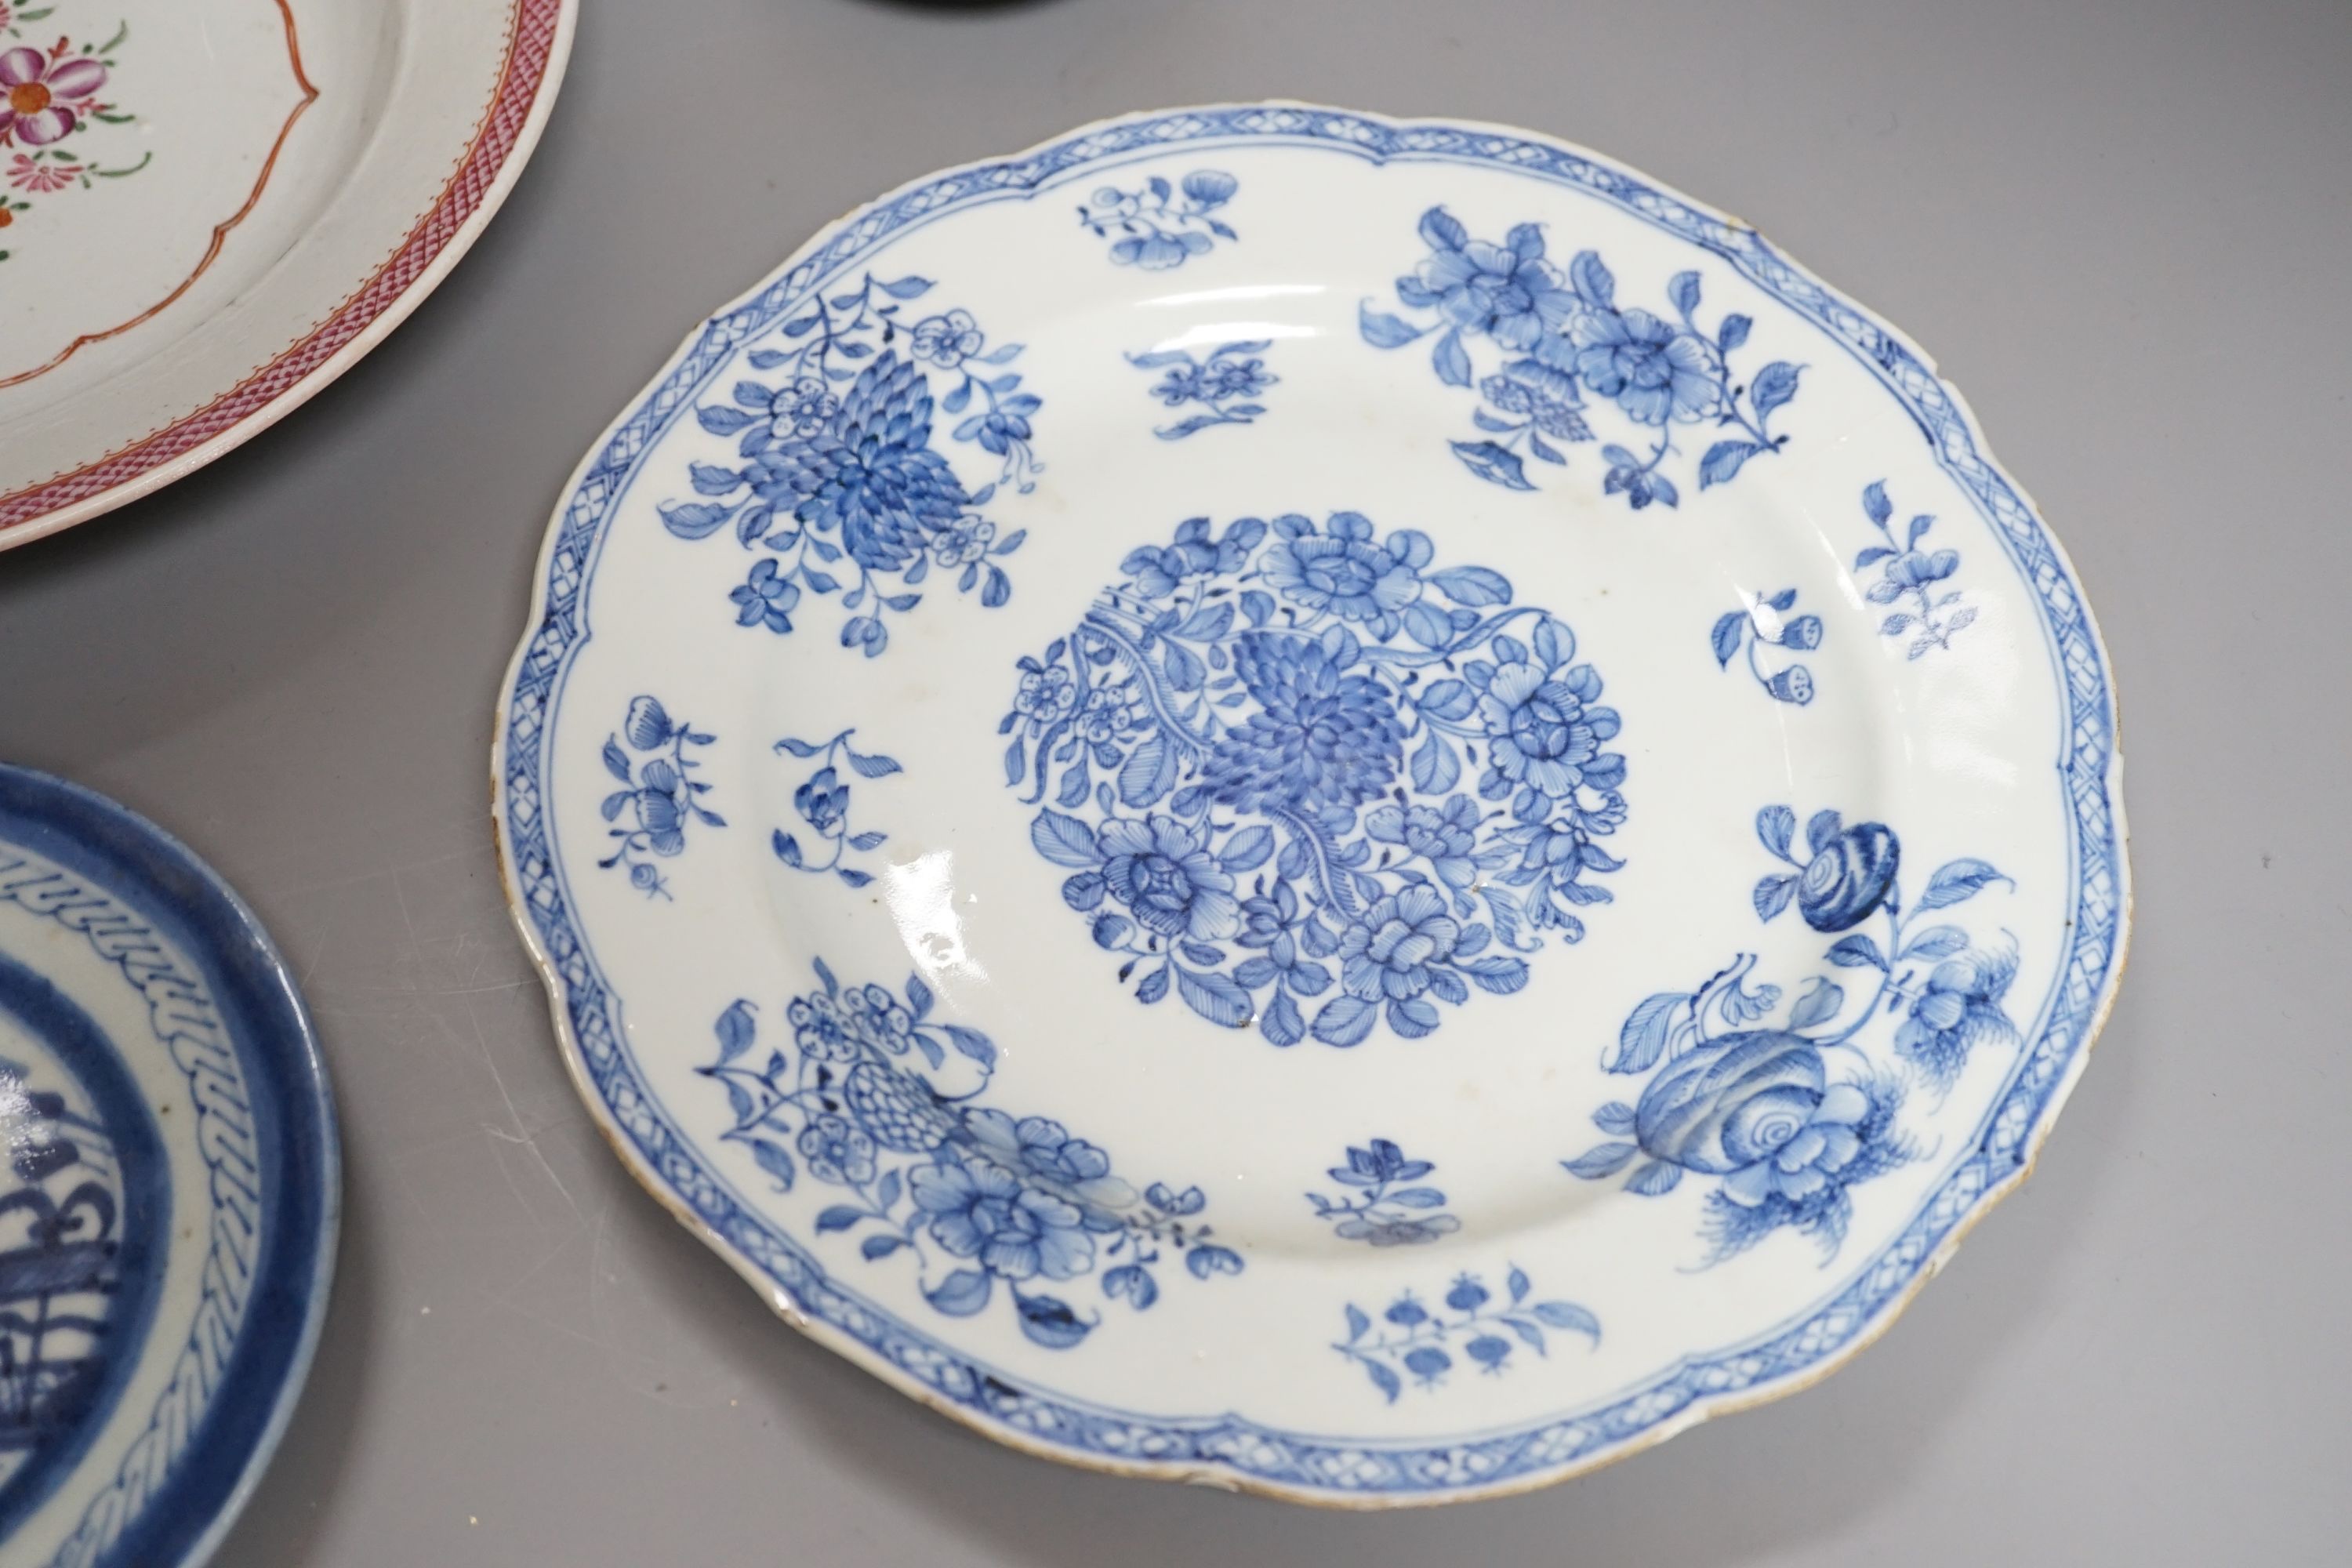 An 18th century Chinese export blue and white dish, 23cm, together with three other Chinese ceramic items